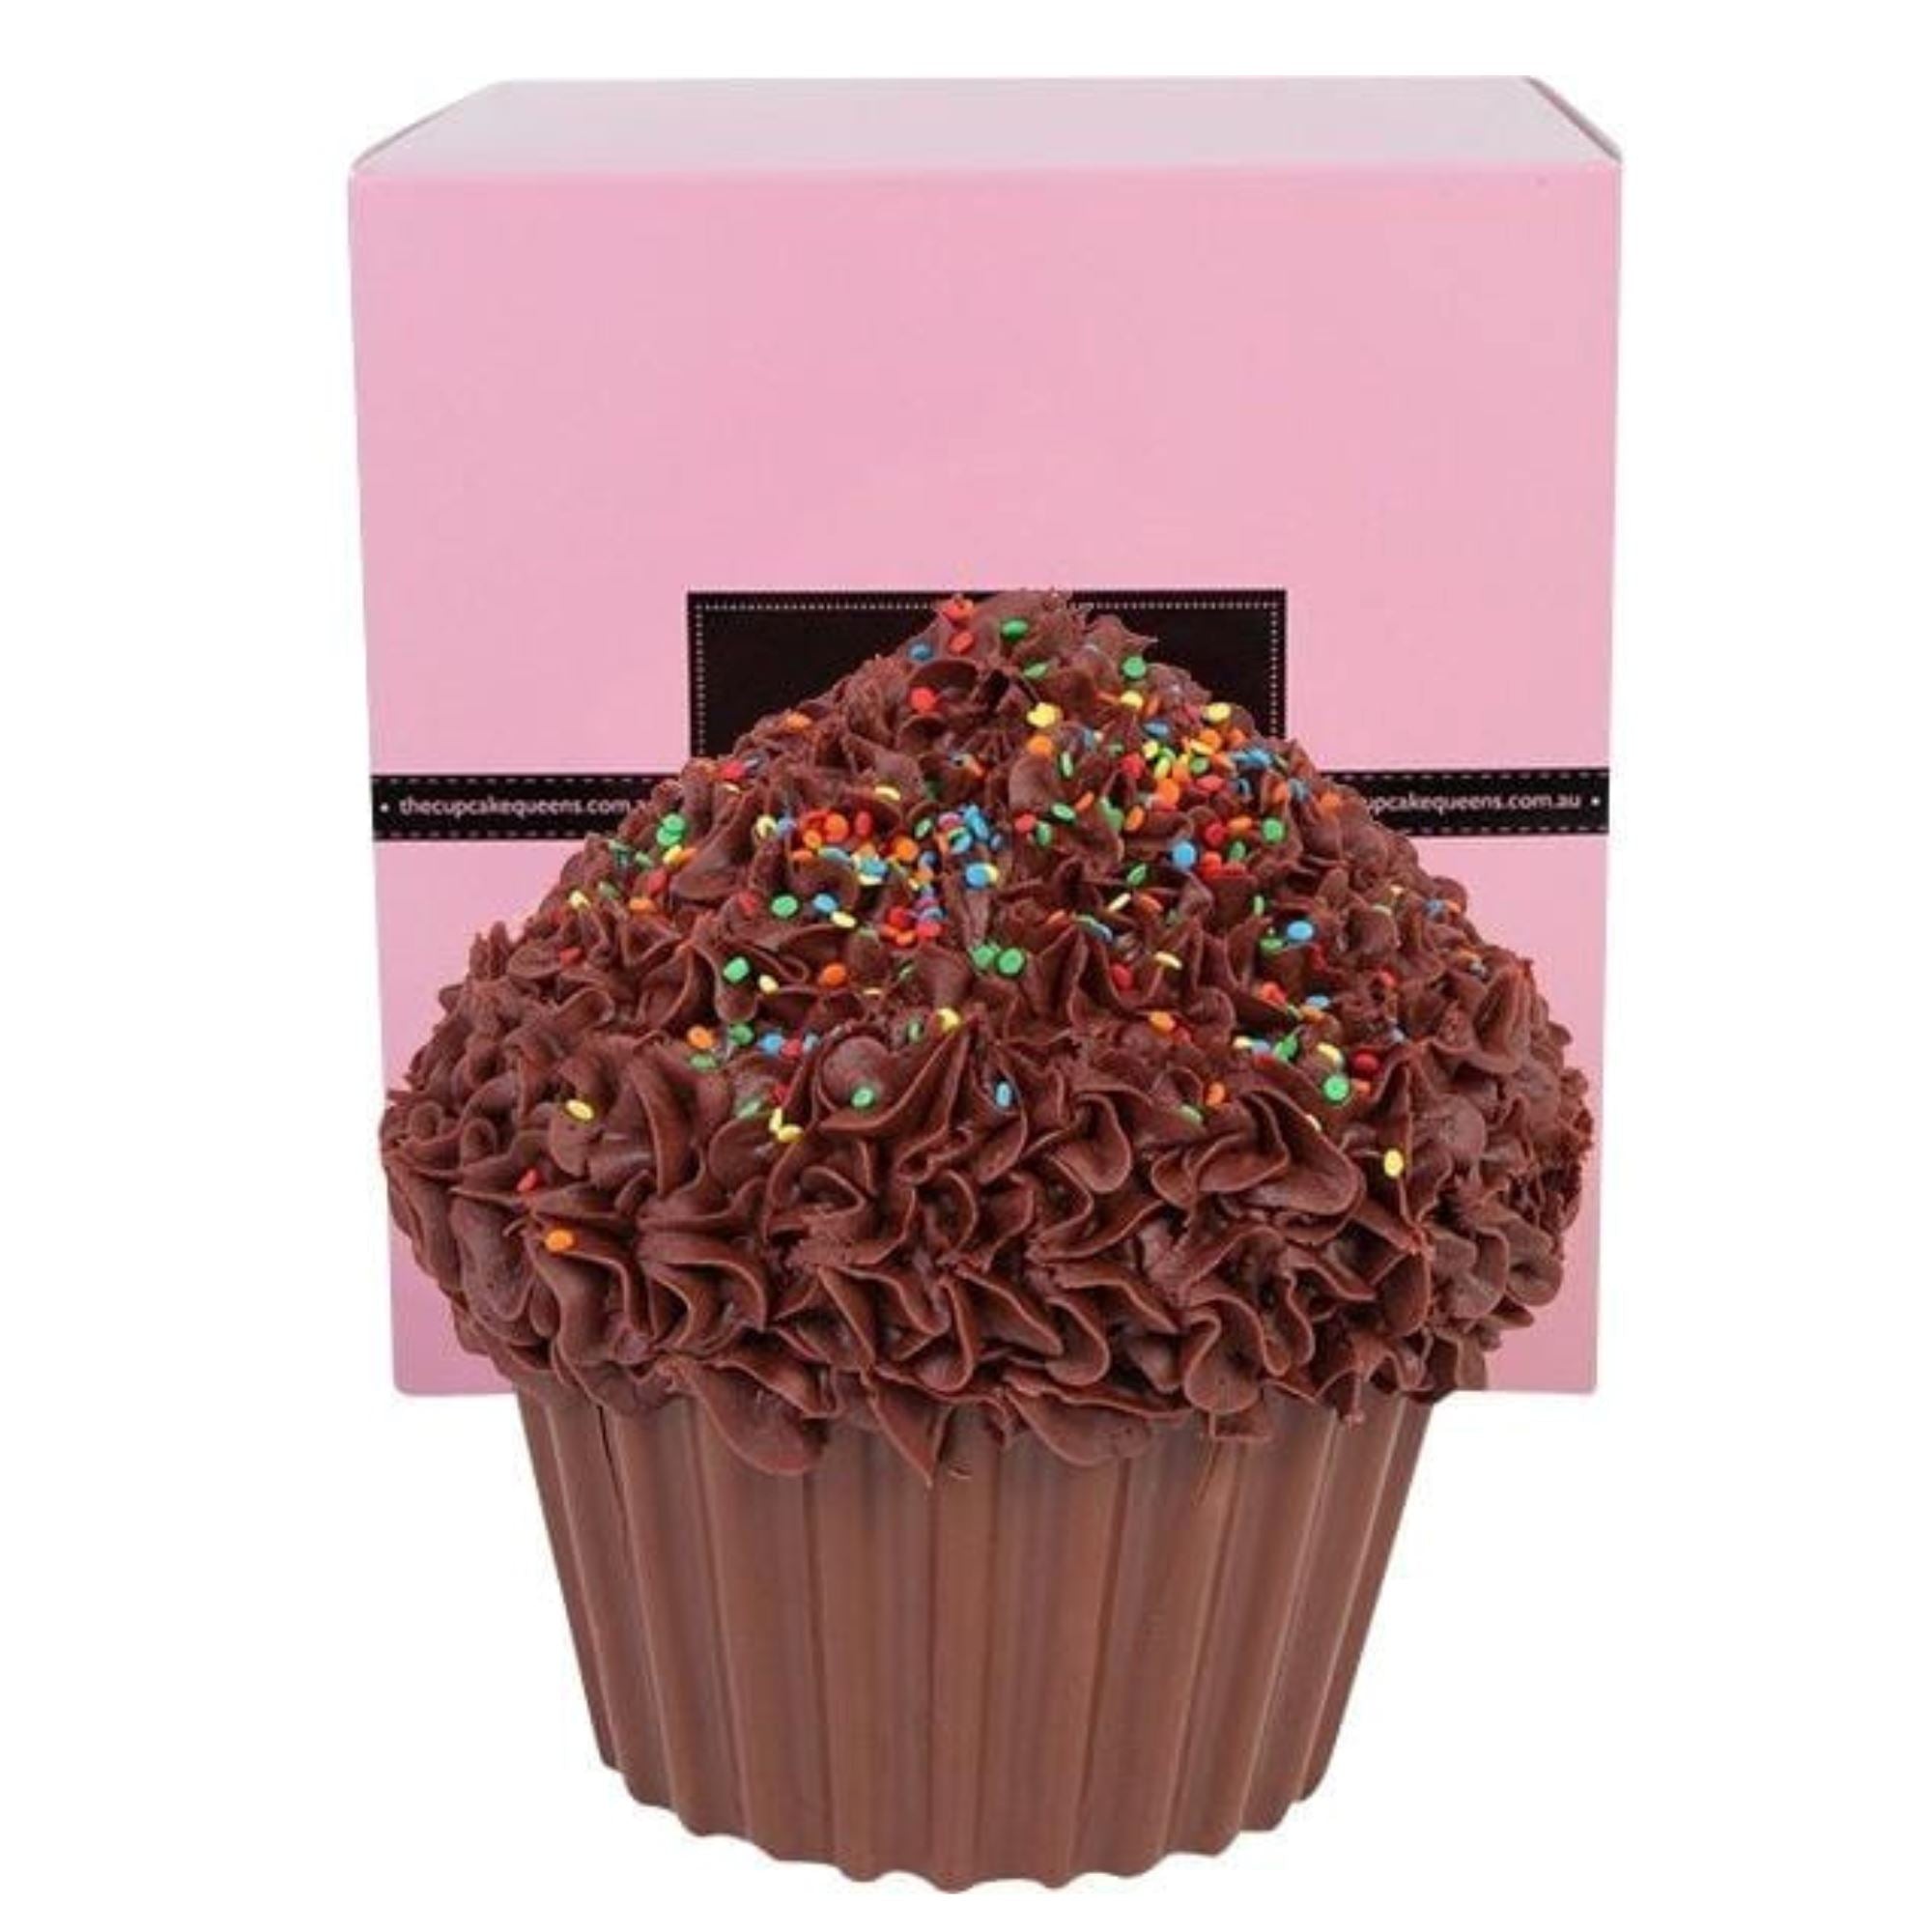 Dark Chocolate Giant Cupcake with Sprinkles Cakes The Cupcake Queens 